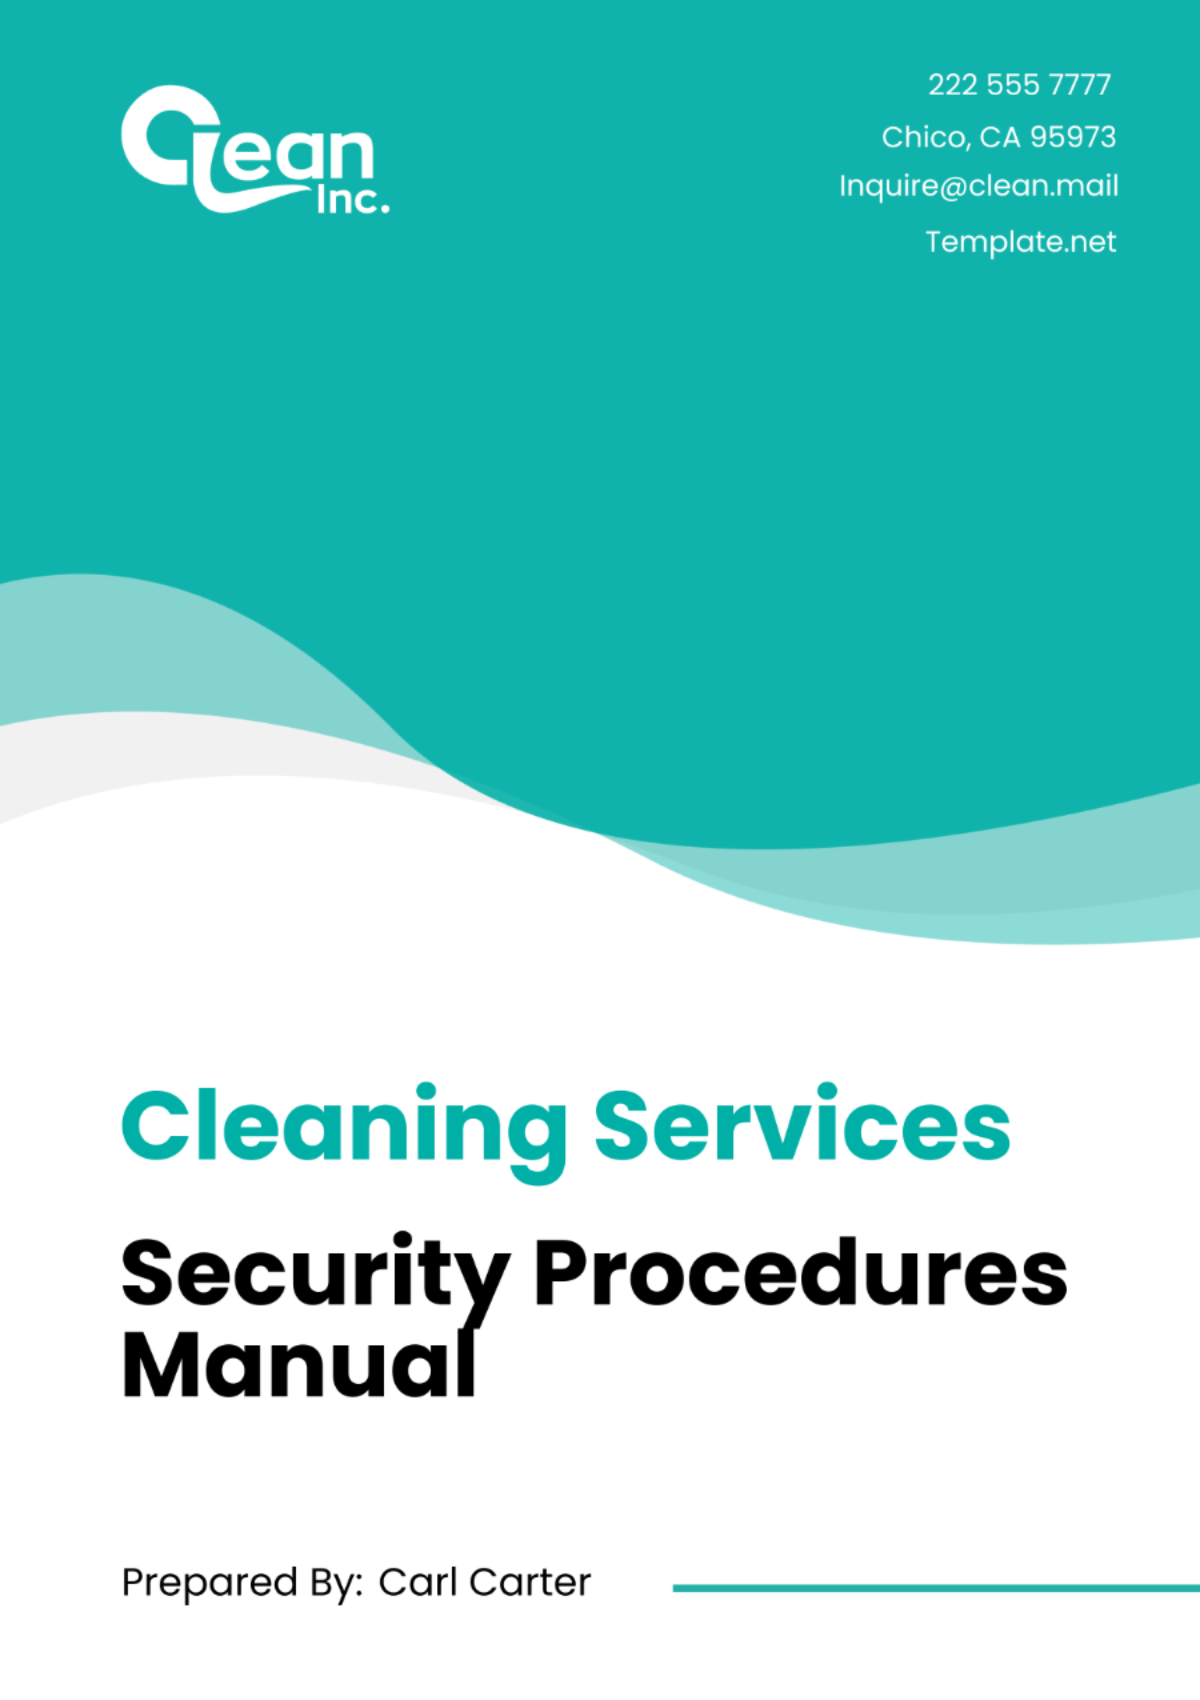 Cleaning Services Security Procedures Manual Template